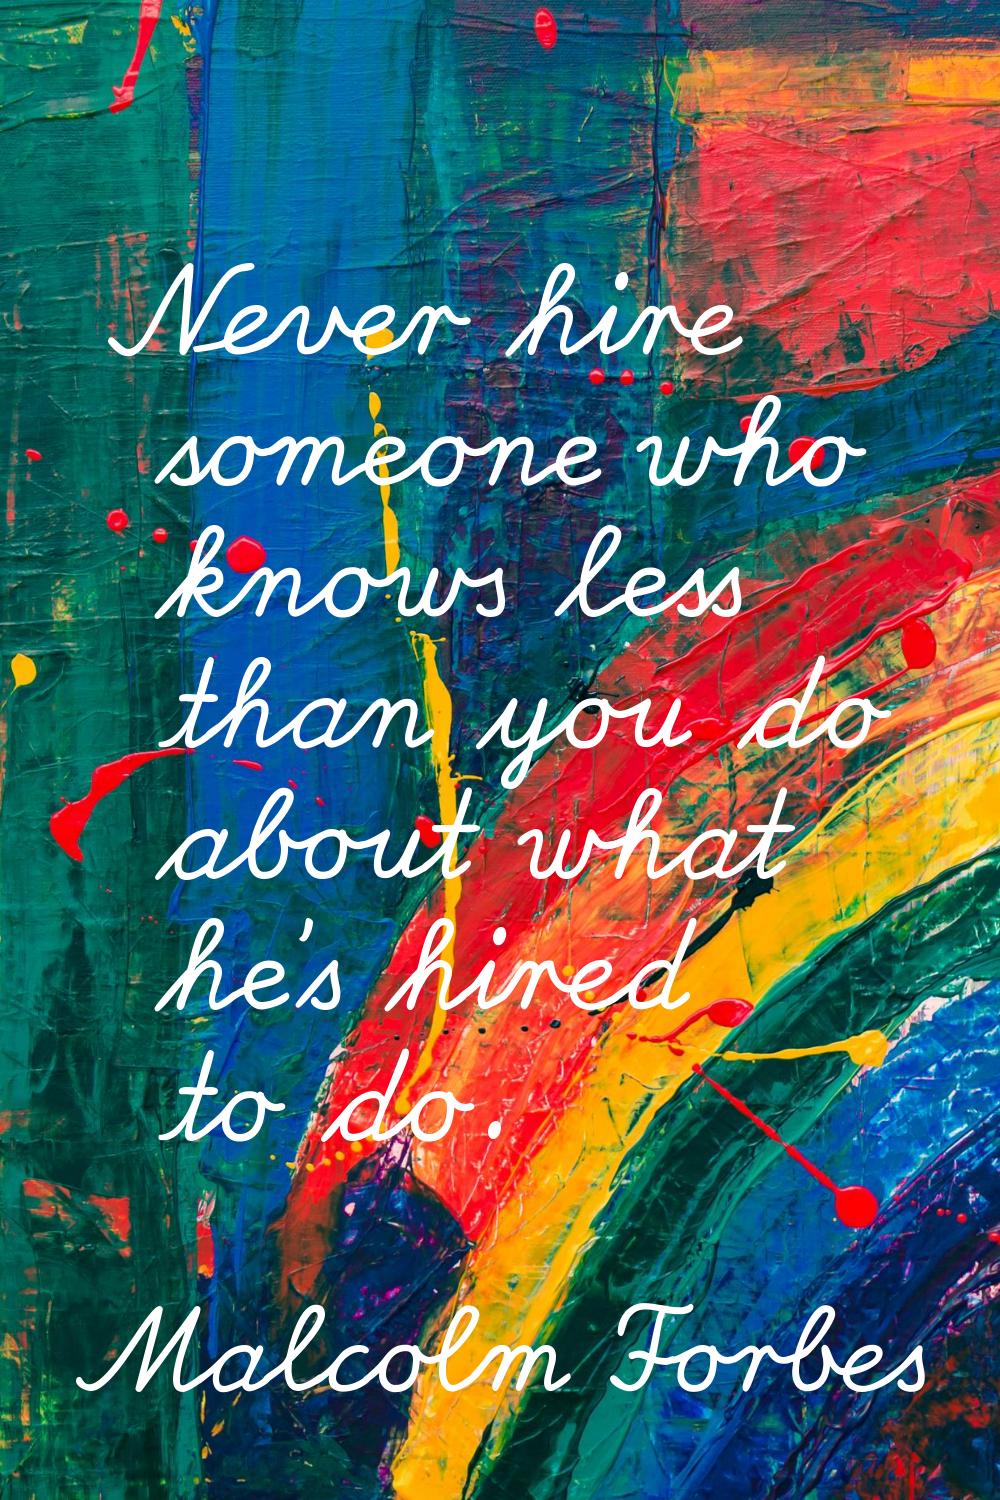 Never hire someone who knows less than you do about what he's hired to do.